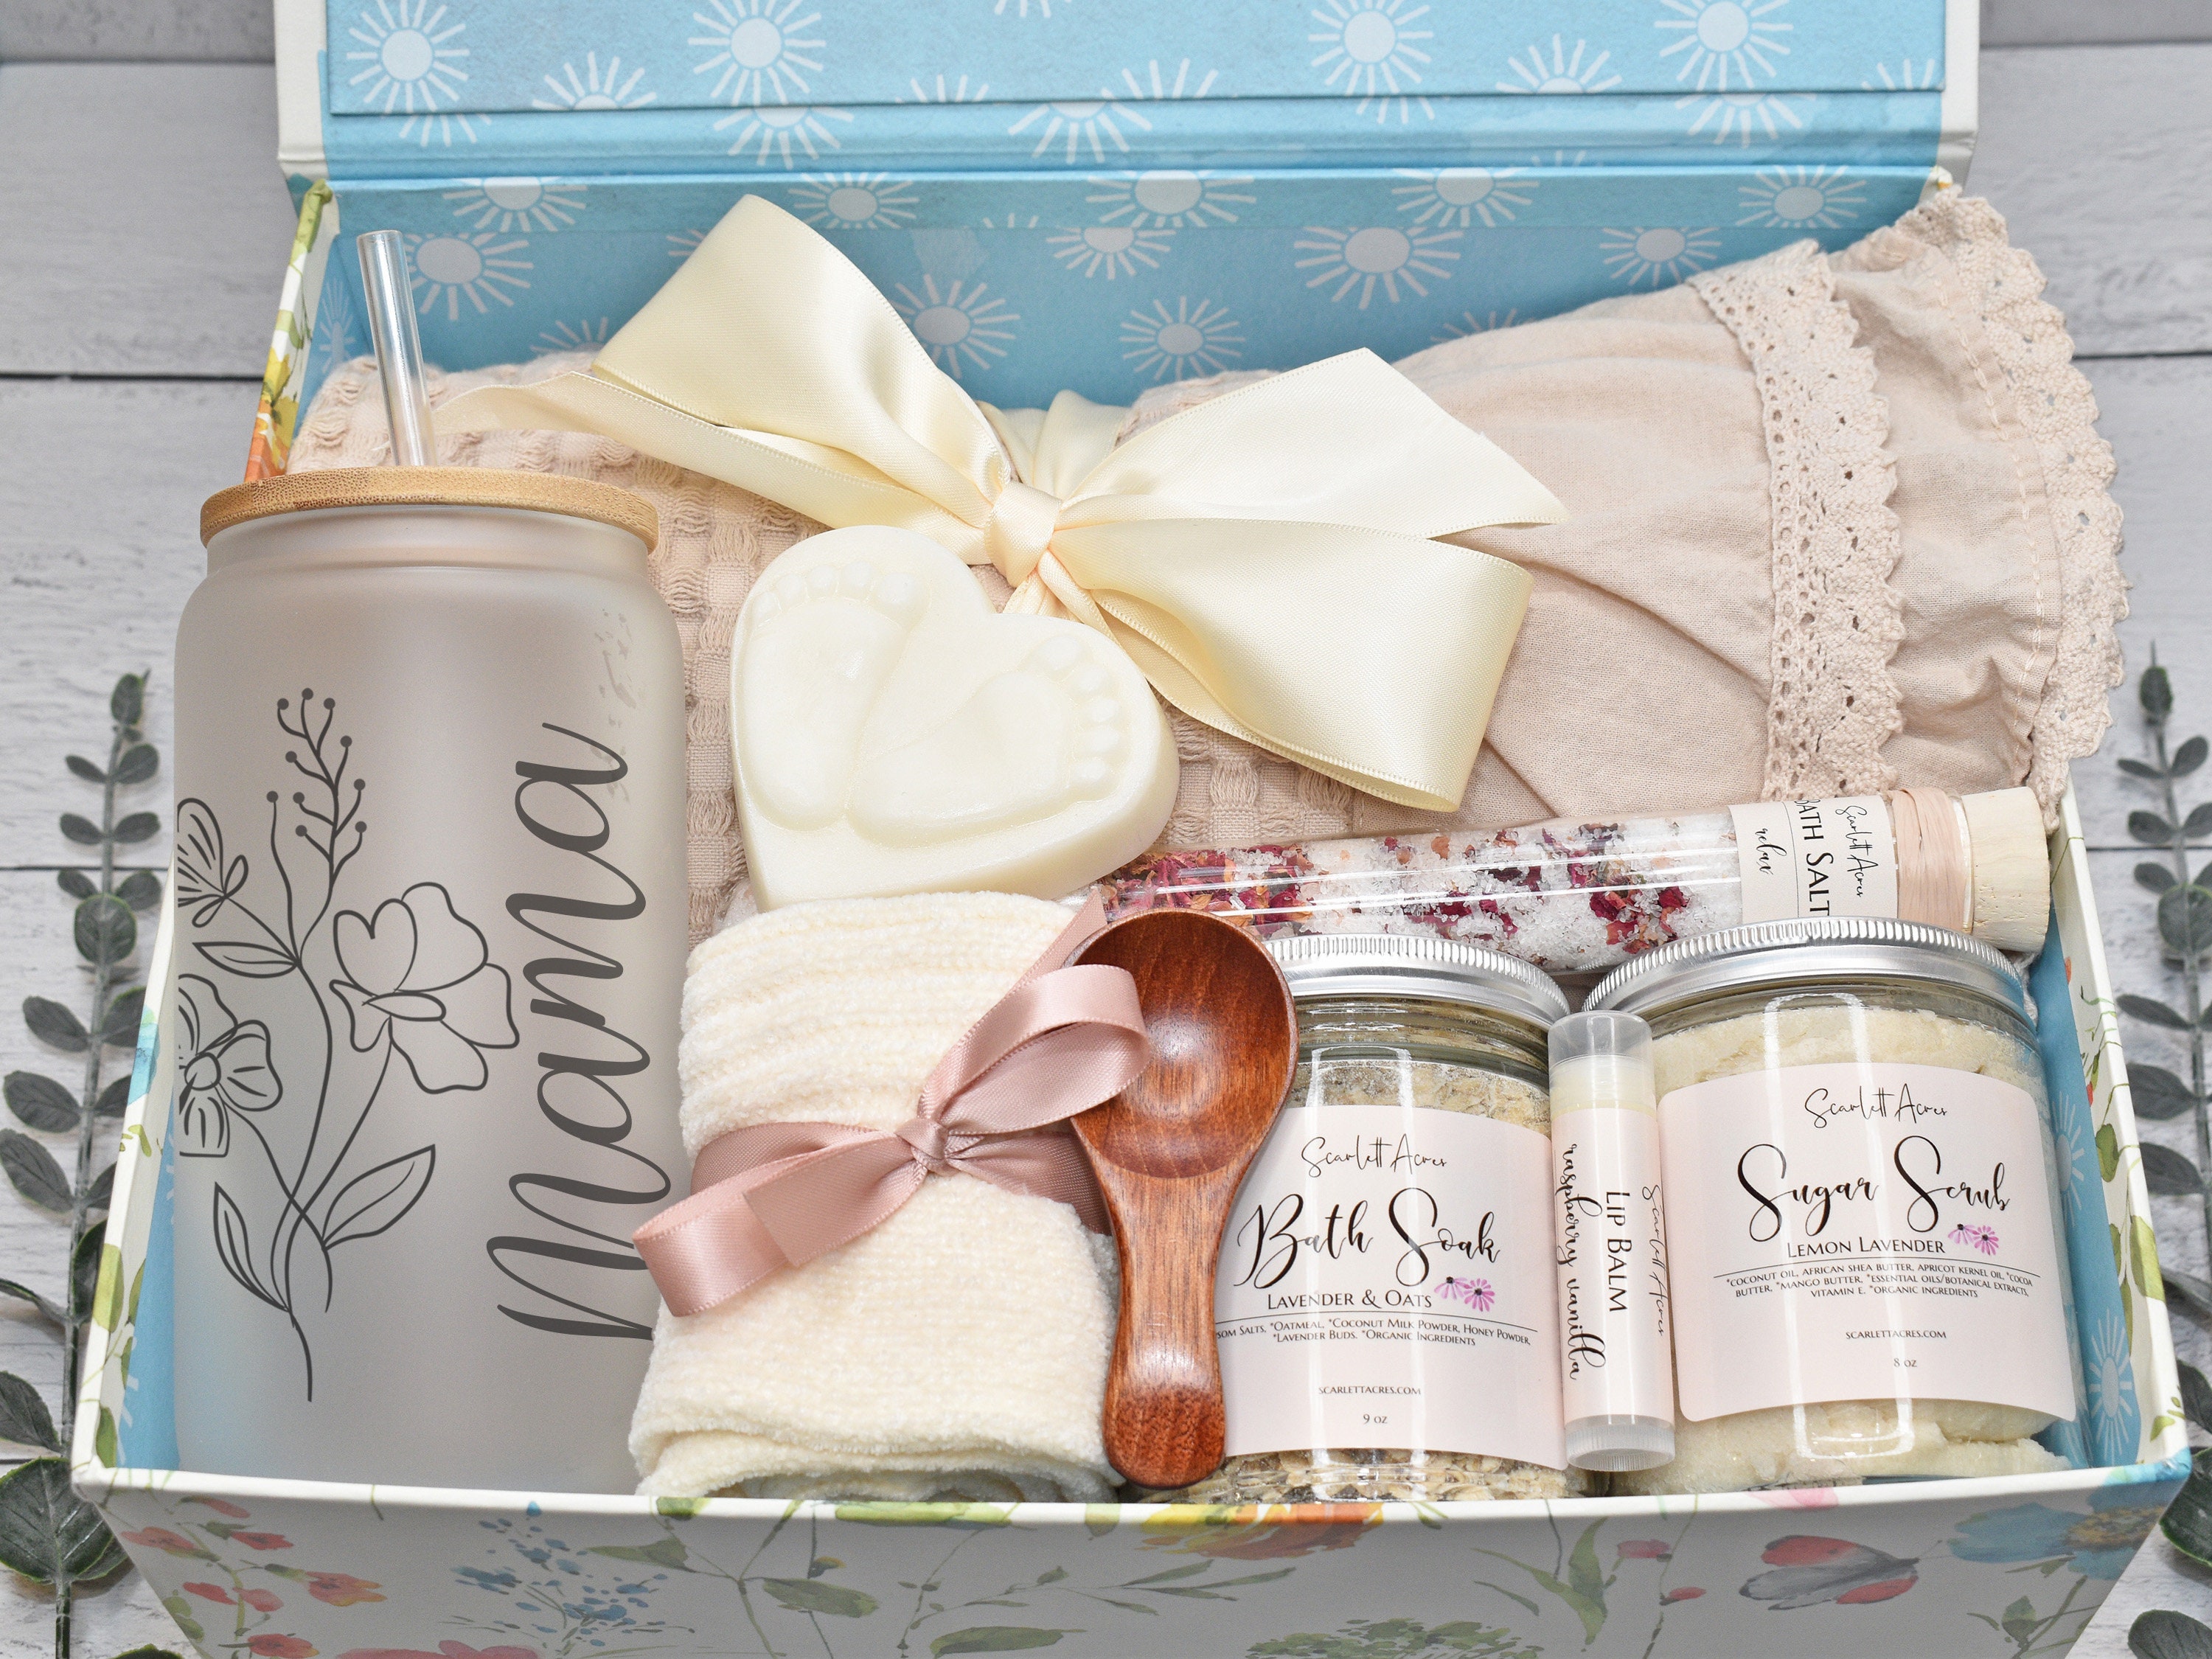 Amazon.com : Pregnancy Gift Basket - Perfect Expecting : Baby